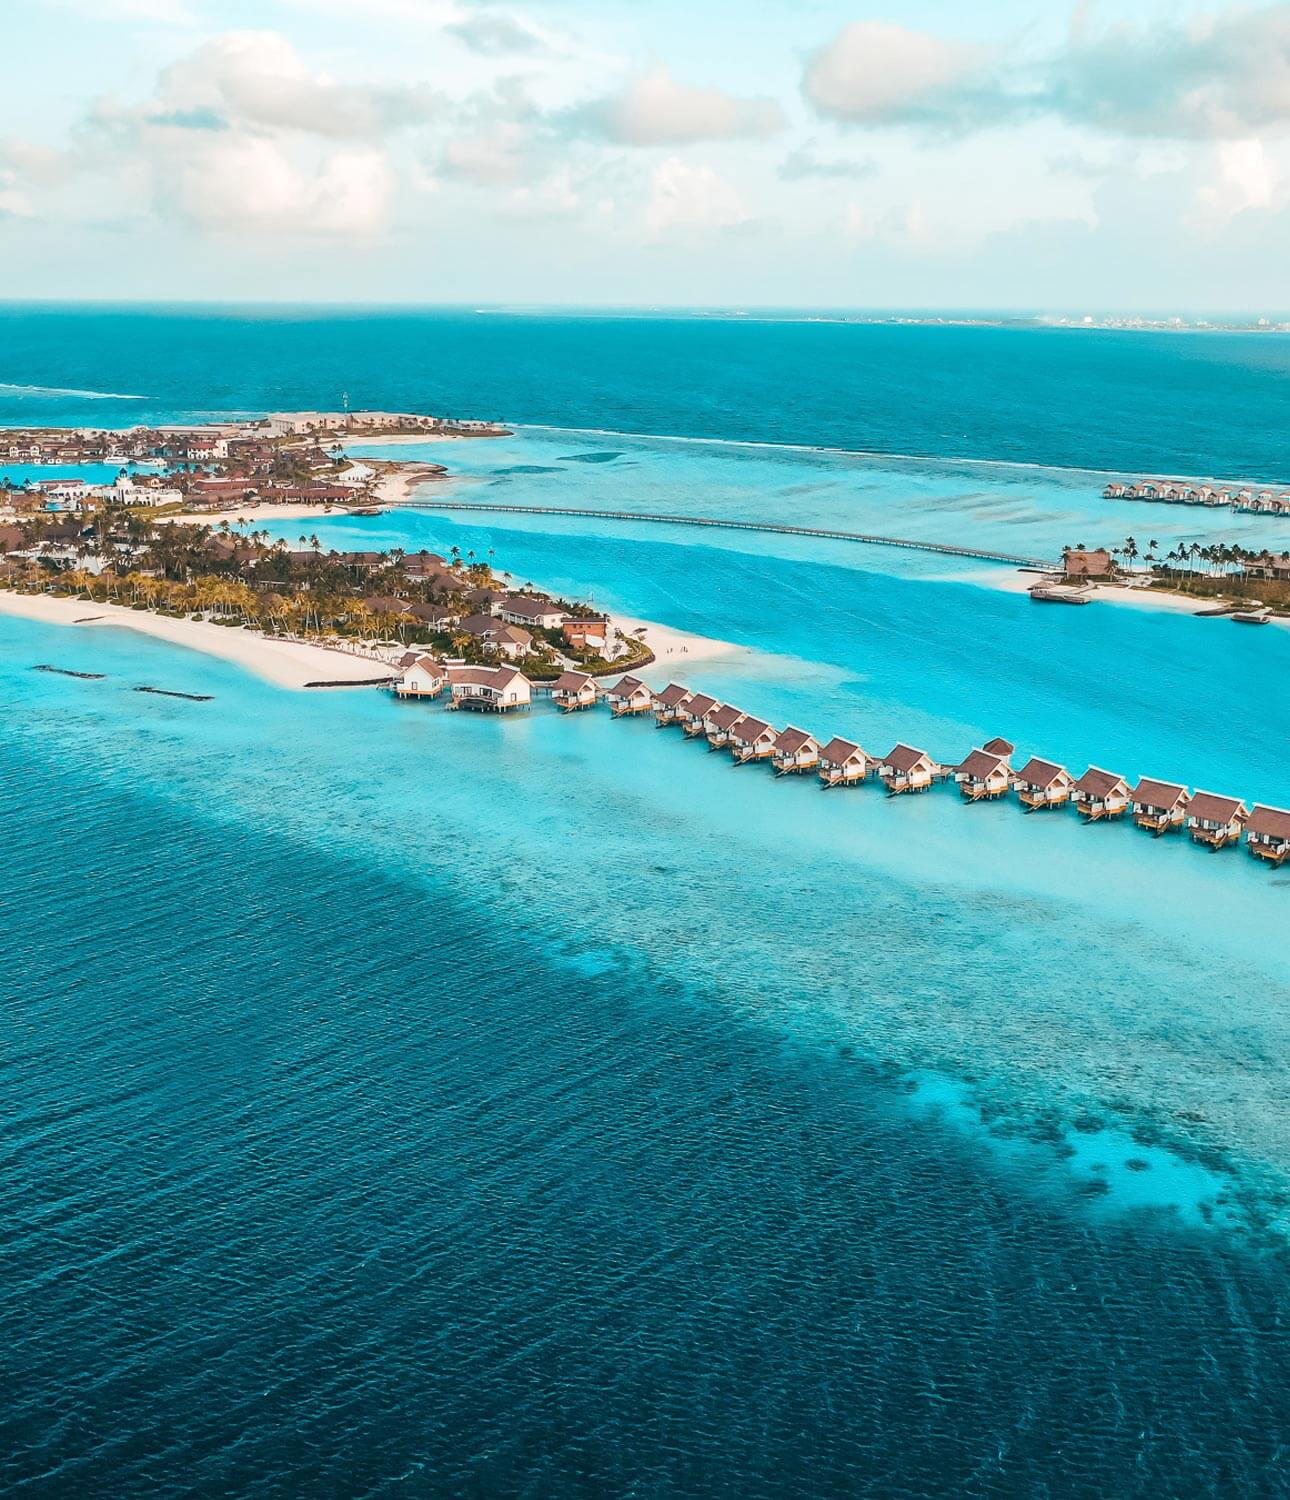 Your Maldivian experience